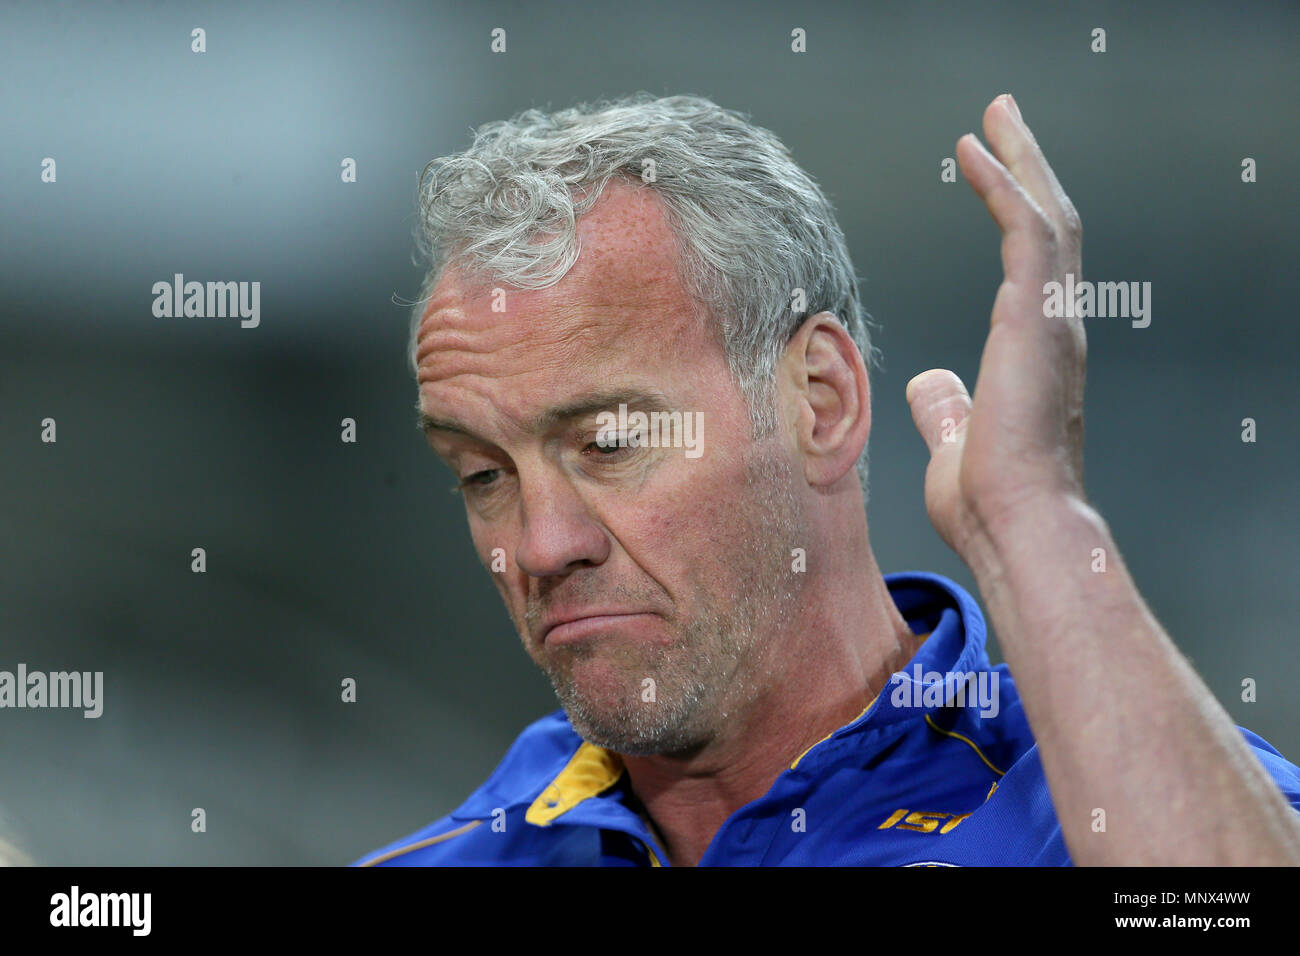 Leeds Rhino's head Coach Brian McDermott after the Betfred Super League, Magic Weekend match at St James' Park, Newcastle. PRESS ASSOCIATION Photo. Picture date: Saturday May 19, 2018. See PA story RUGBYL Castleford. Photo credit should read: Richard Sellers/PA Wire. RESTRICTIONS: Editorial use only. No commercial use. No false commercial association. No video emulation. No manipulation of images. Stock Photo